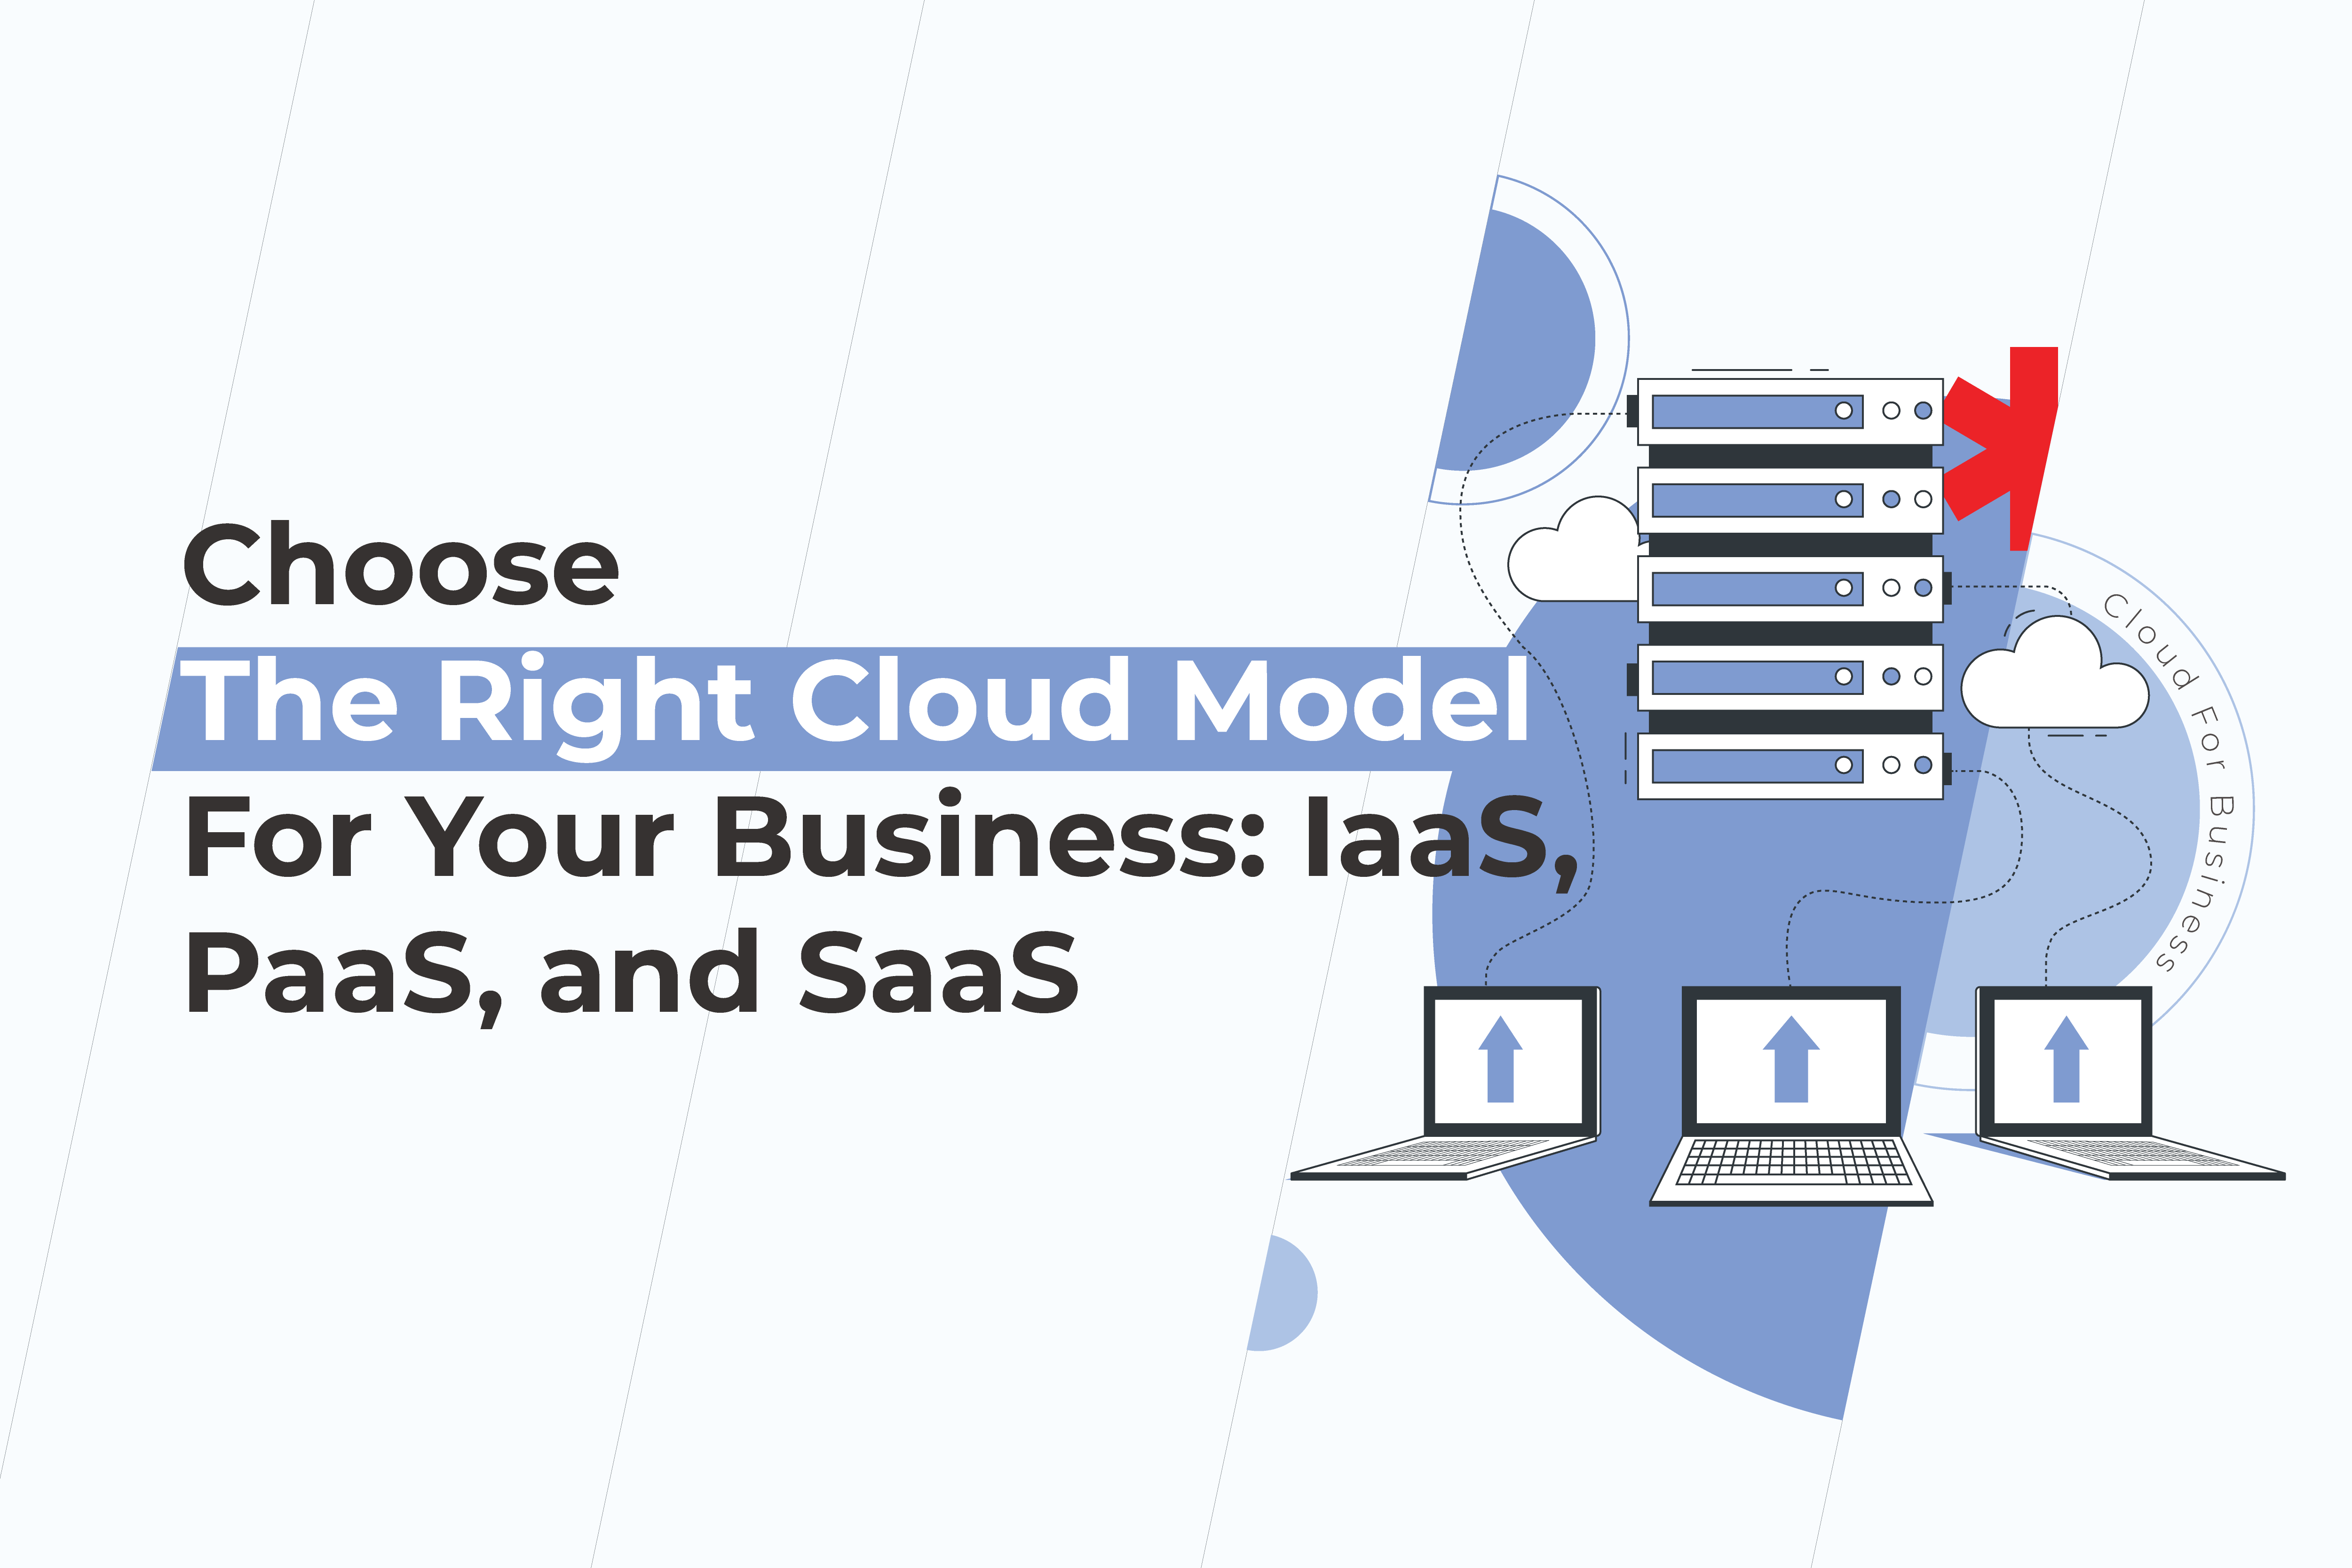 Choose The Right Cloud Model For Your Business: IaaS, PaaS, and SaaS